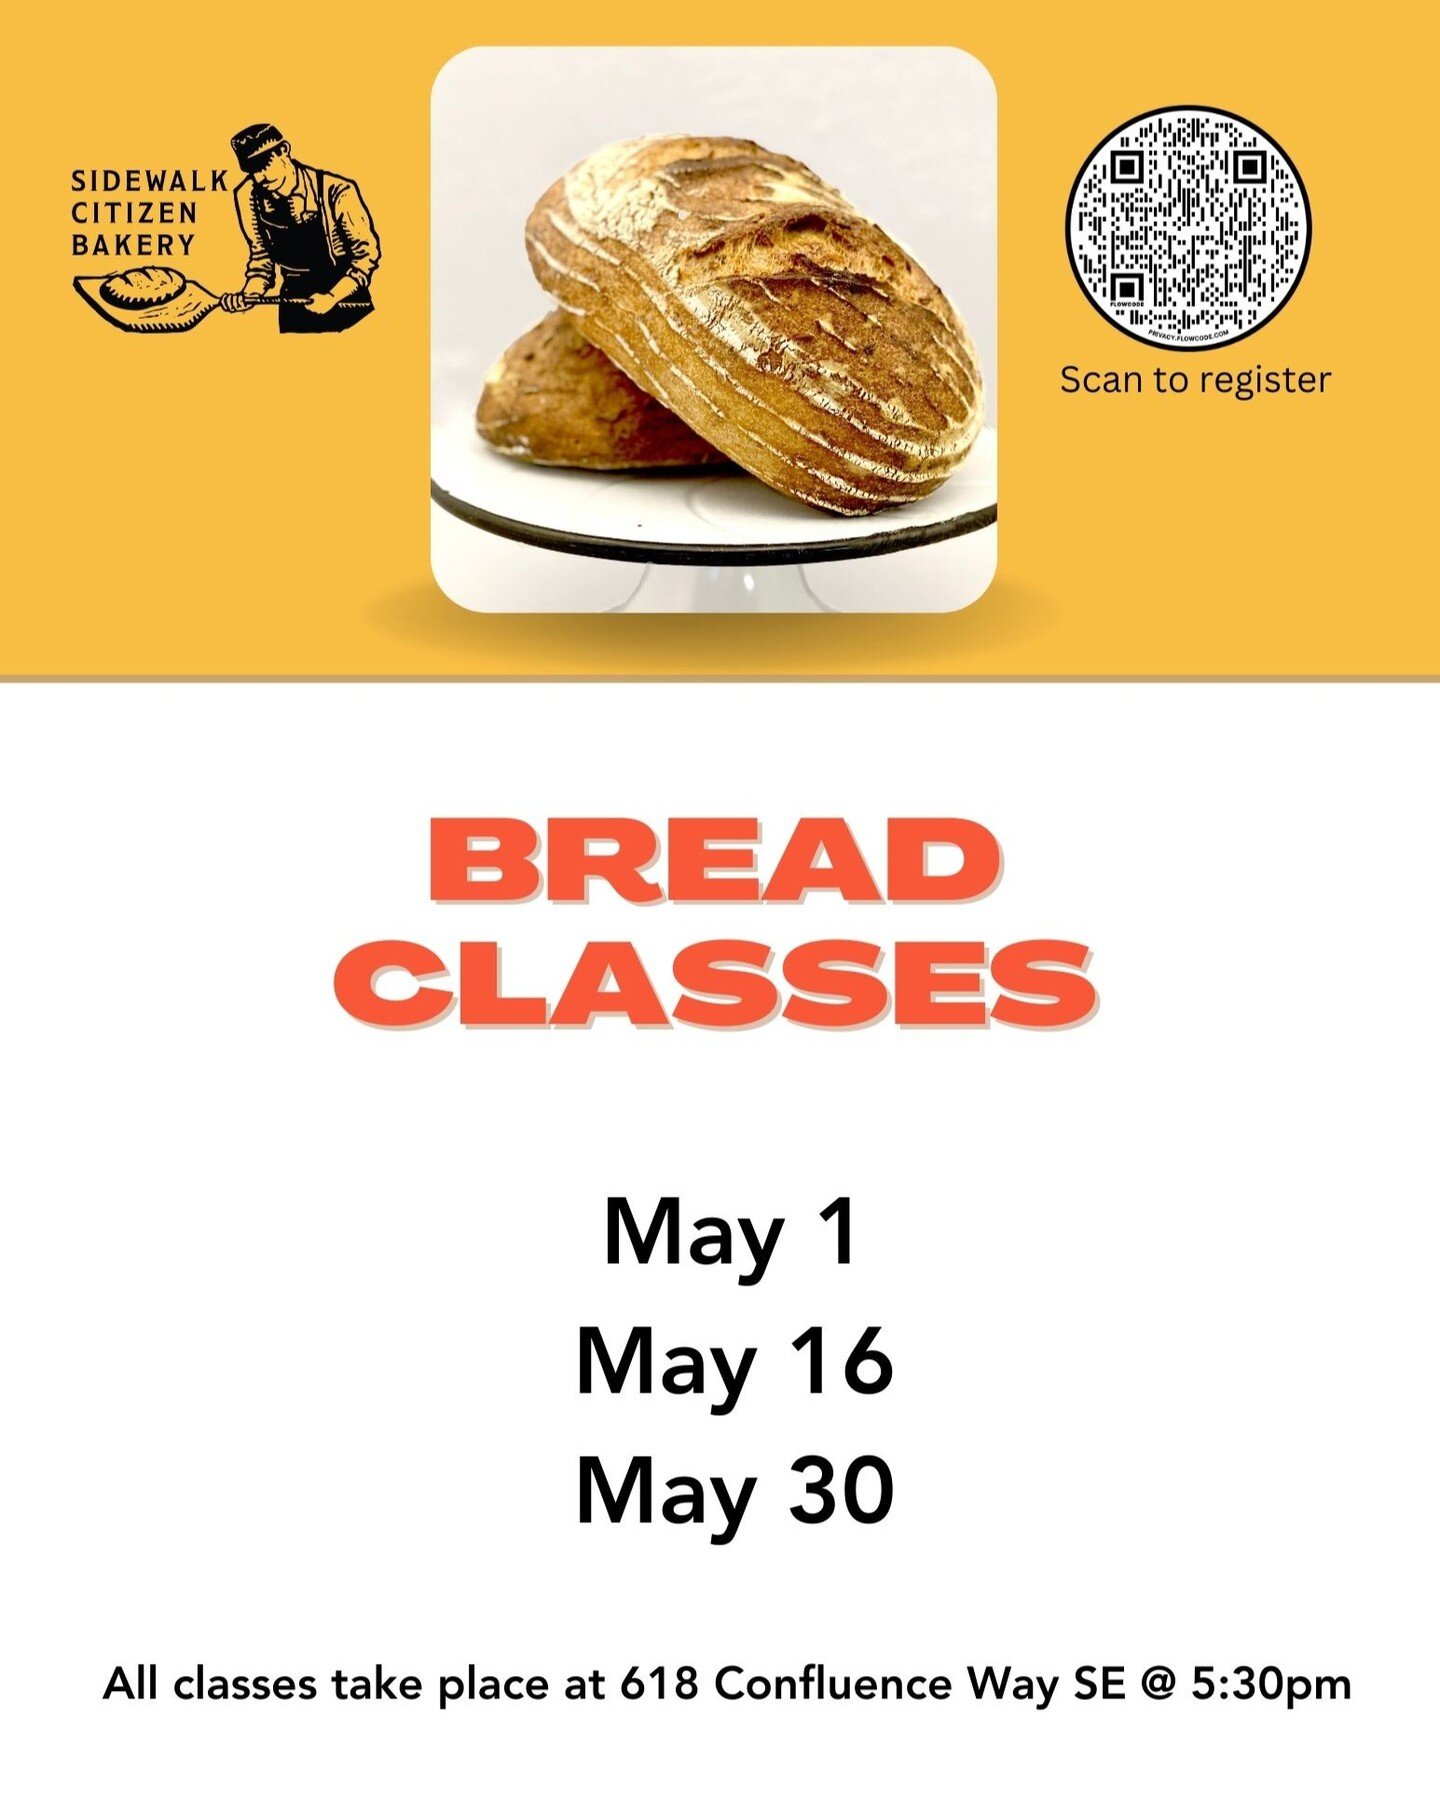 Our next batch of bread classes are now live! April is sold out, but we have added a third class in May due to high demand! Head to the link in our bio to learn more!
.
.
.
#yyc #yyceats #yycbread #yycclass